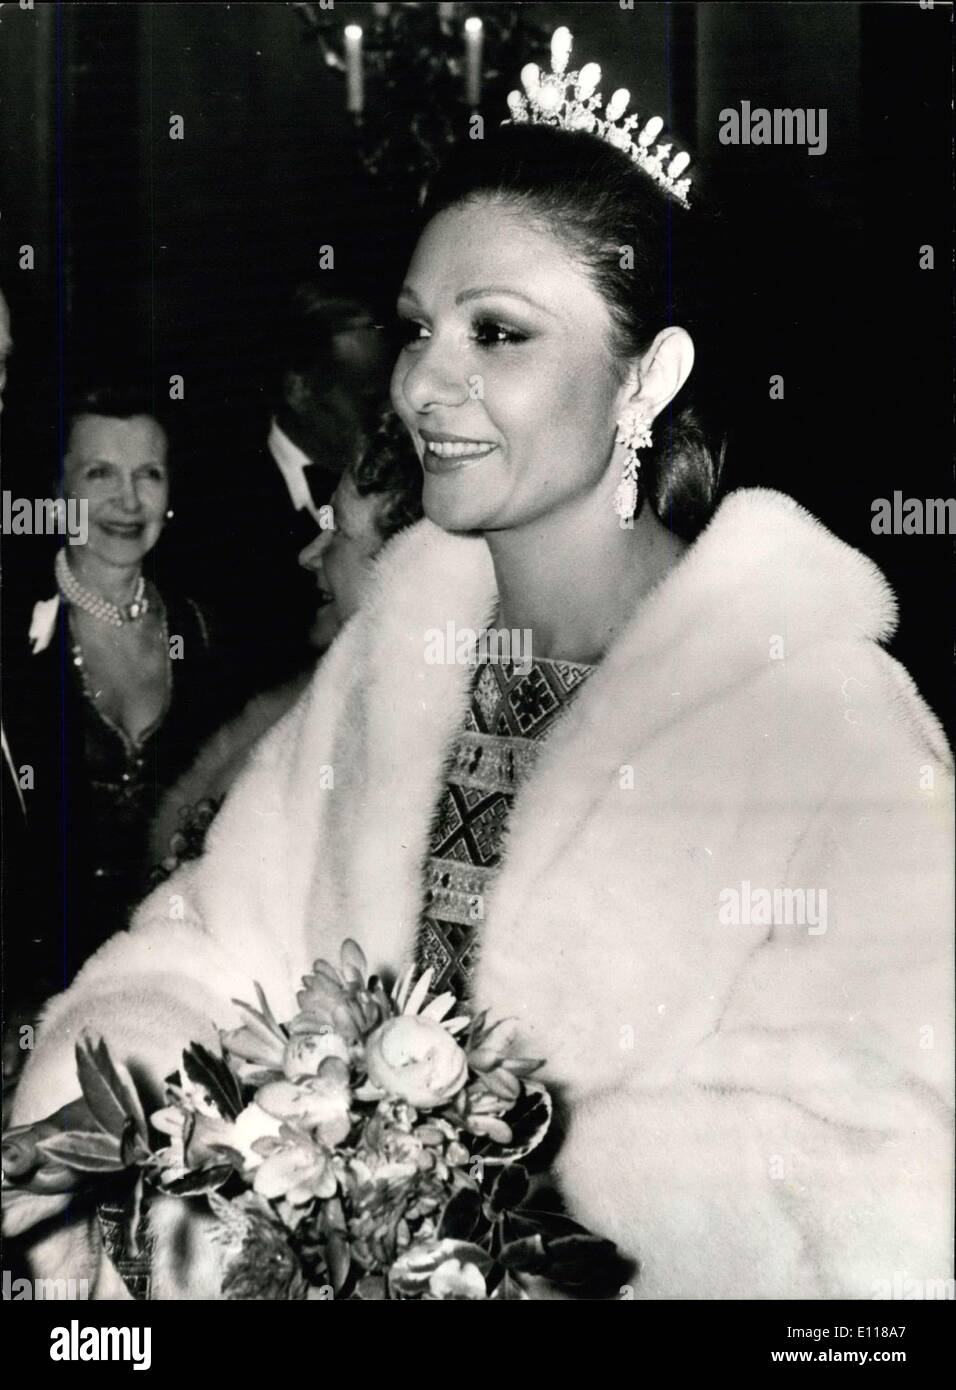 Apr. 08, 1976 - Empress Farah of Iran at the Royal Opera House: Her Imperial Majesty, Empress Farah of Iran, who is an a six-day visit to London as guest of Queen Elizabeth, the Queen Mother, and the Government, last night went to the Royal Opera House, Covent Garden, for the Royal Ballet's productions of four modern mini-ballets. She was accompanied by the Queen Mother. Photo shows Empress Farah of Iran arriving at the Royal Opera House, Covent Garden, London last night. Stock Photo